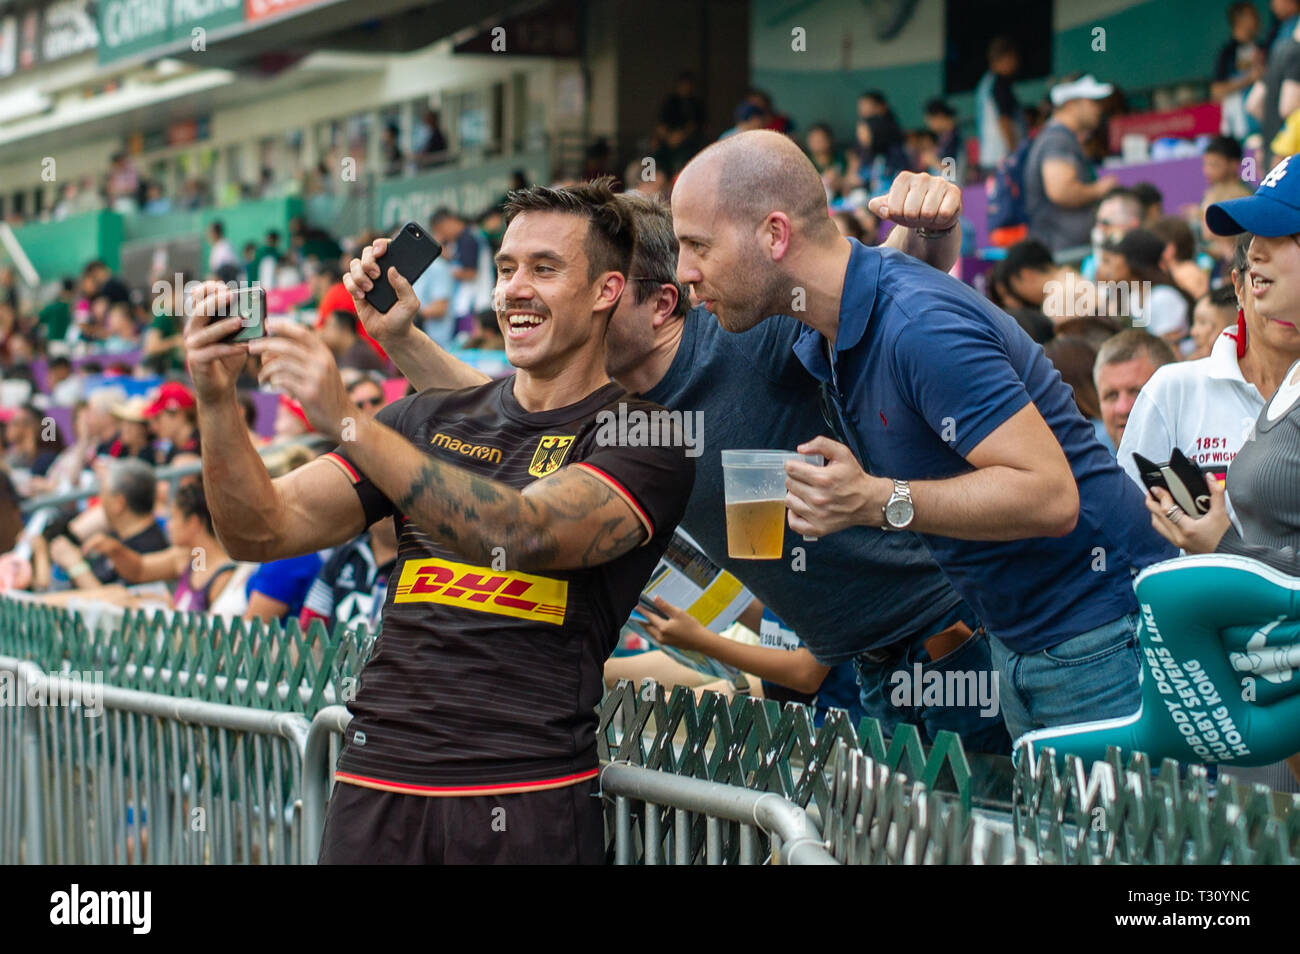 Hongkong, China. 05th Apr, 2019. Rugby tournament on 05.04.2019 in Hong Kong. Group game Germany - Cook Islands: Tim Biniack (Germany) makes selfies with spectators. Credit: Juergen Kessler/Enterpress/dpa/Alamy Live News Stock Photo